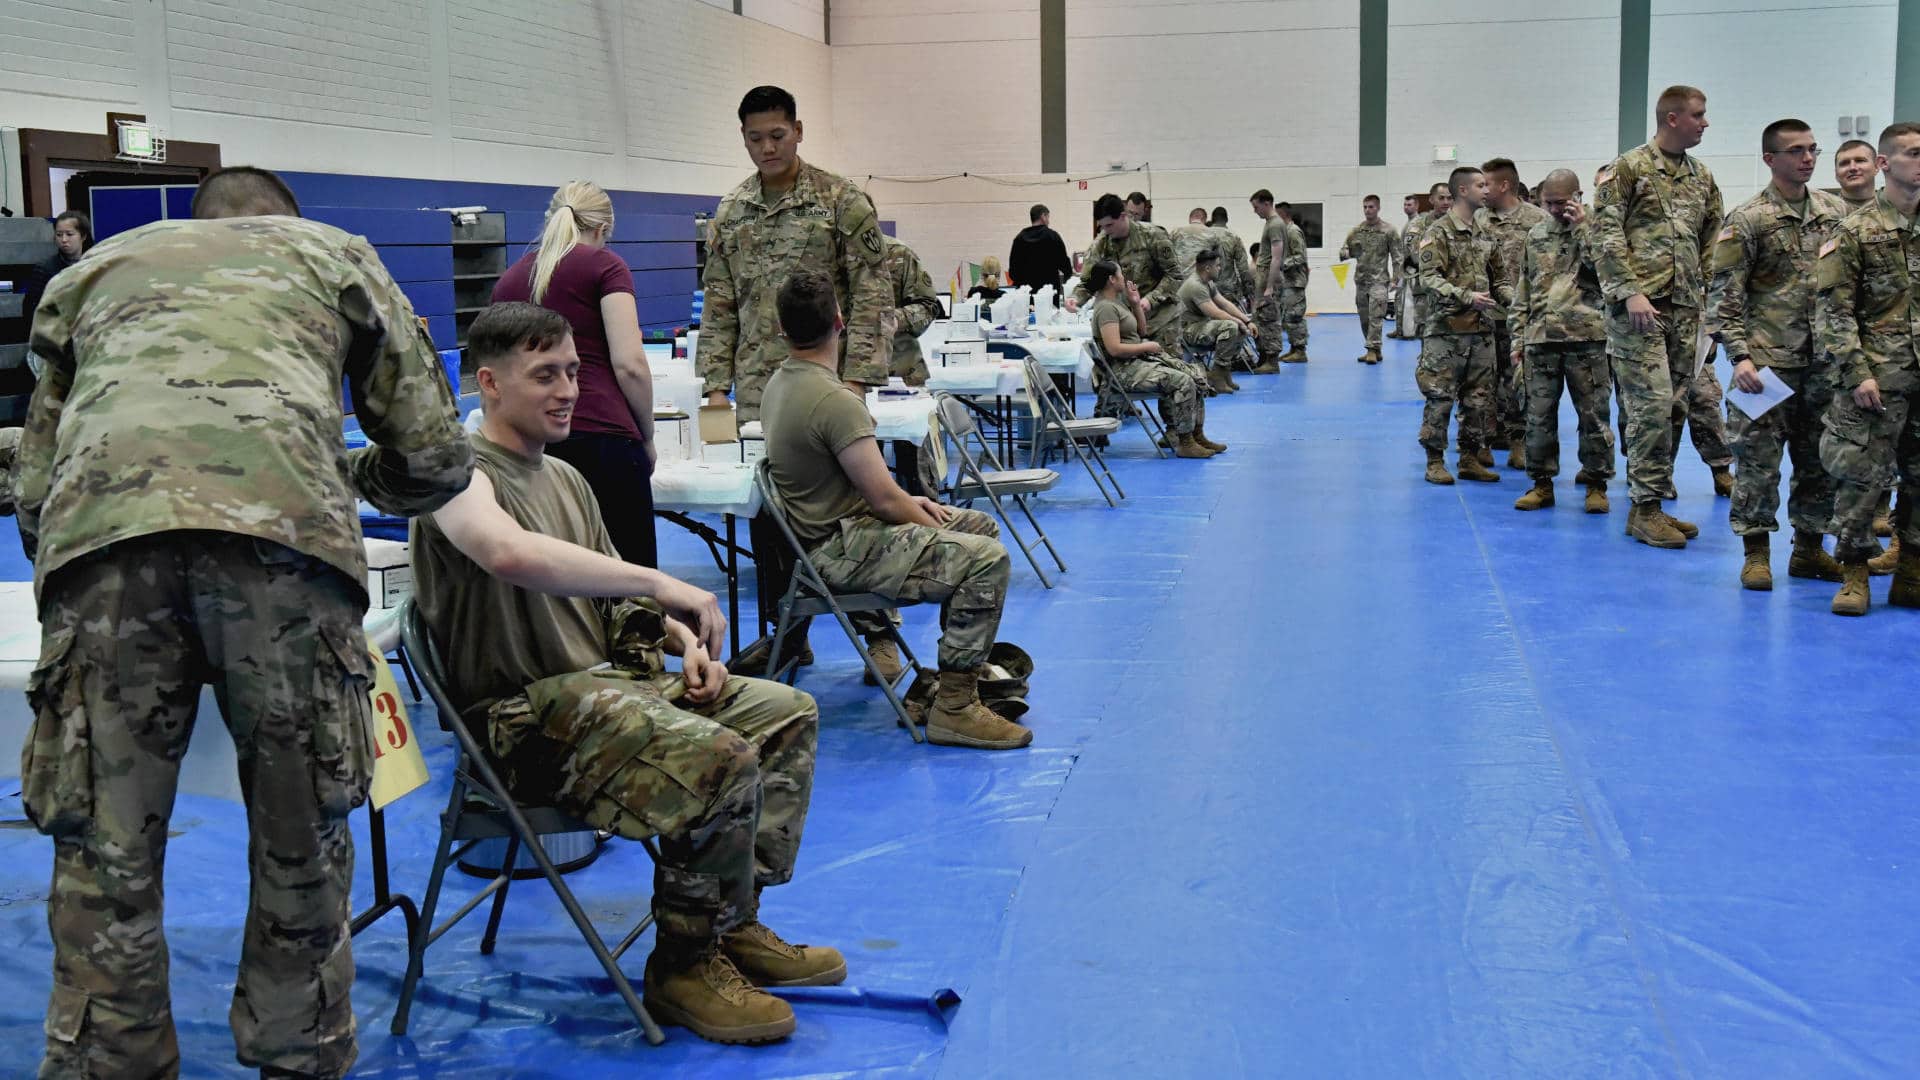 A U.S. Army flu pandemic exercise performed in September 2016, which aimed to give the flu vaccine to 90 percent of the active duty population within 120 hours of receiving it.